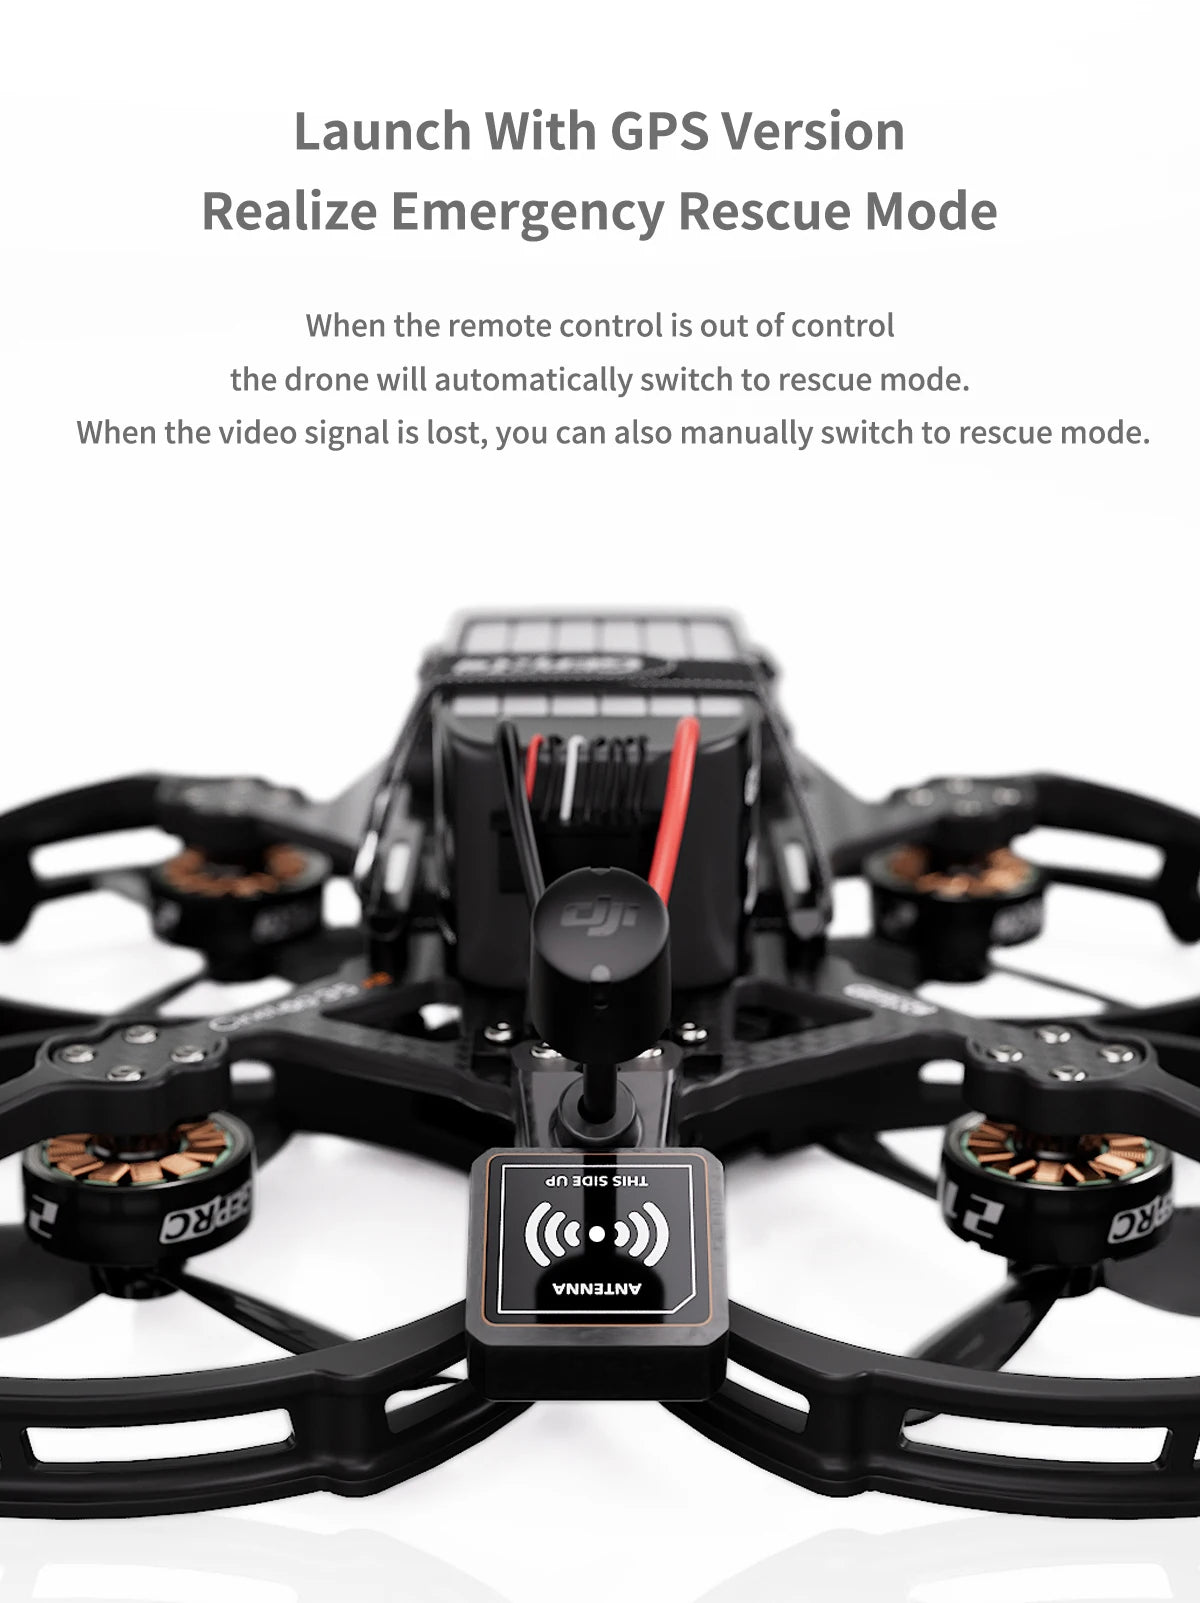 GEPRC Cinelog35 V2 Analog FPV Drone, Launch With GPS Version Realize Emergency Rescue Mode When the remote control is out of control the drone